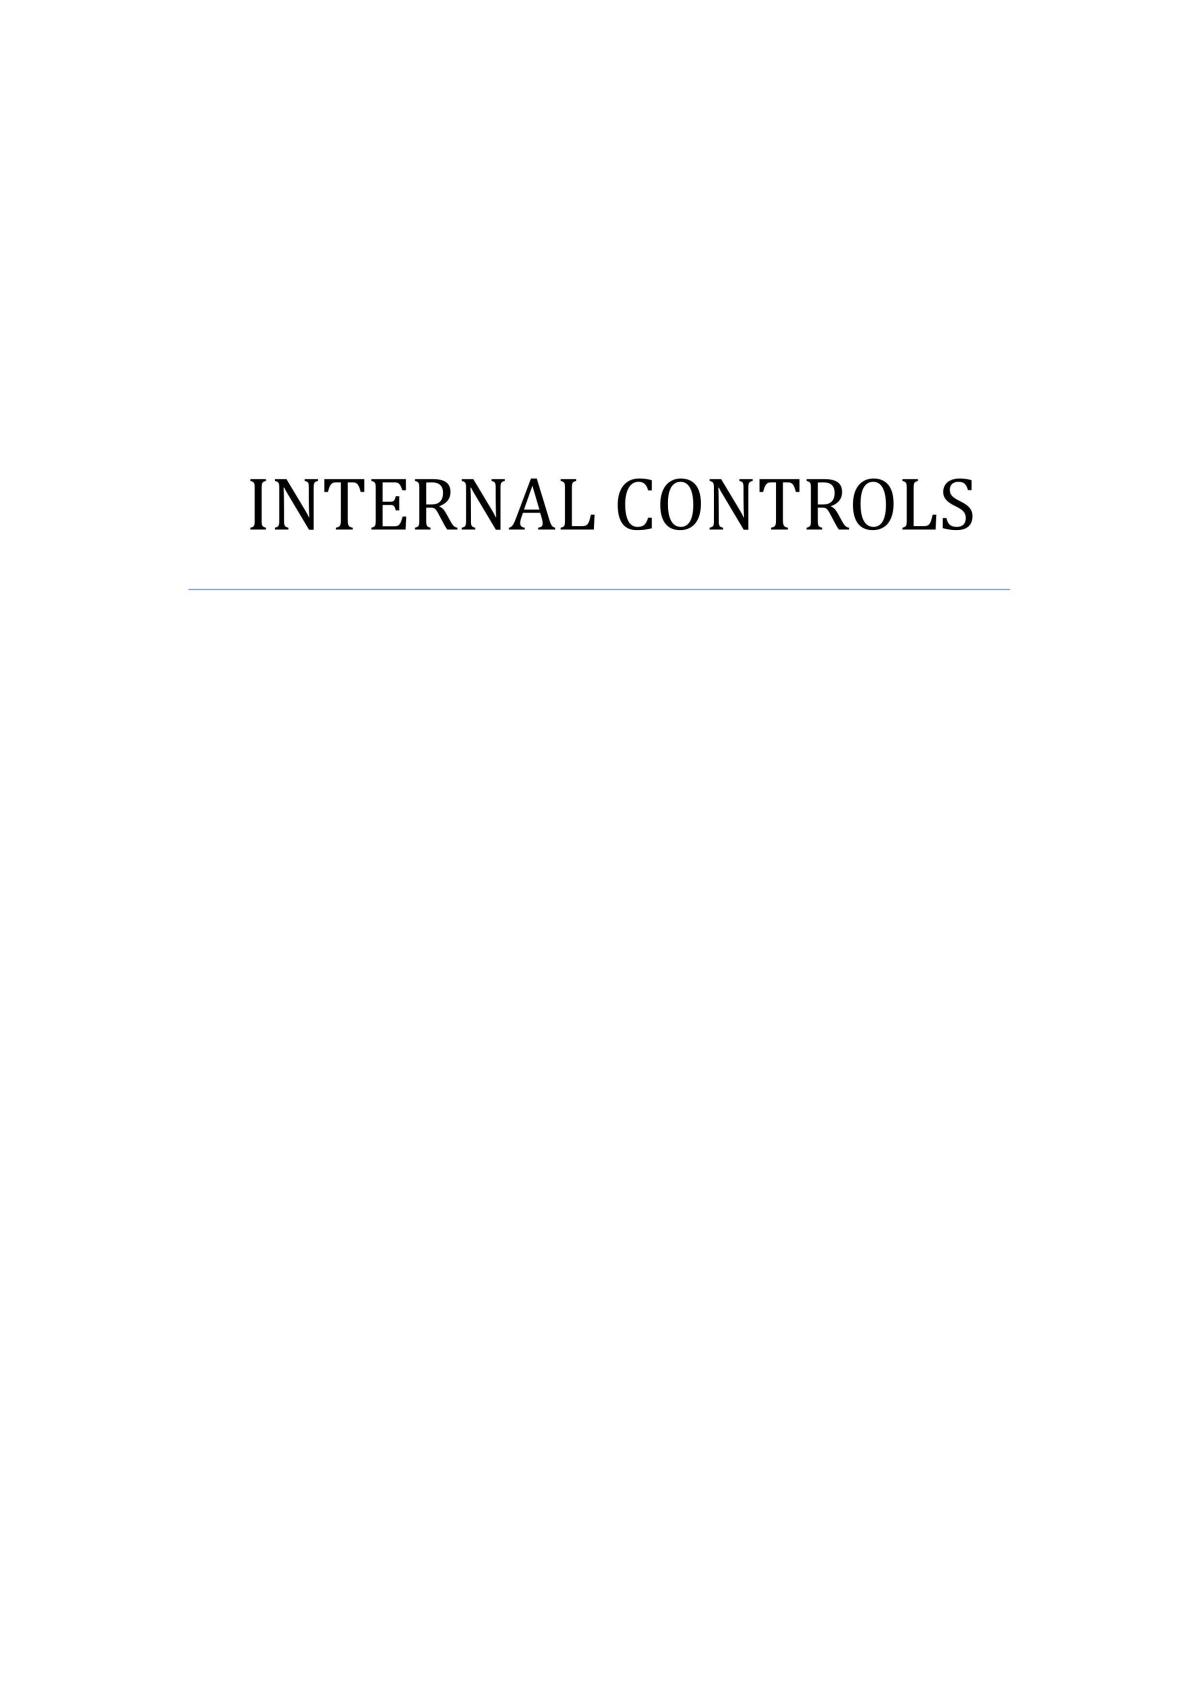 Notes on Internal Controls - Page 1